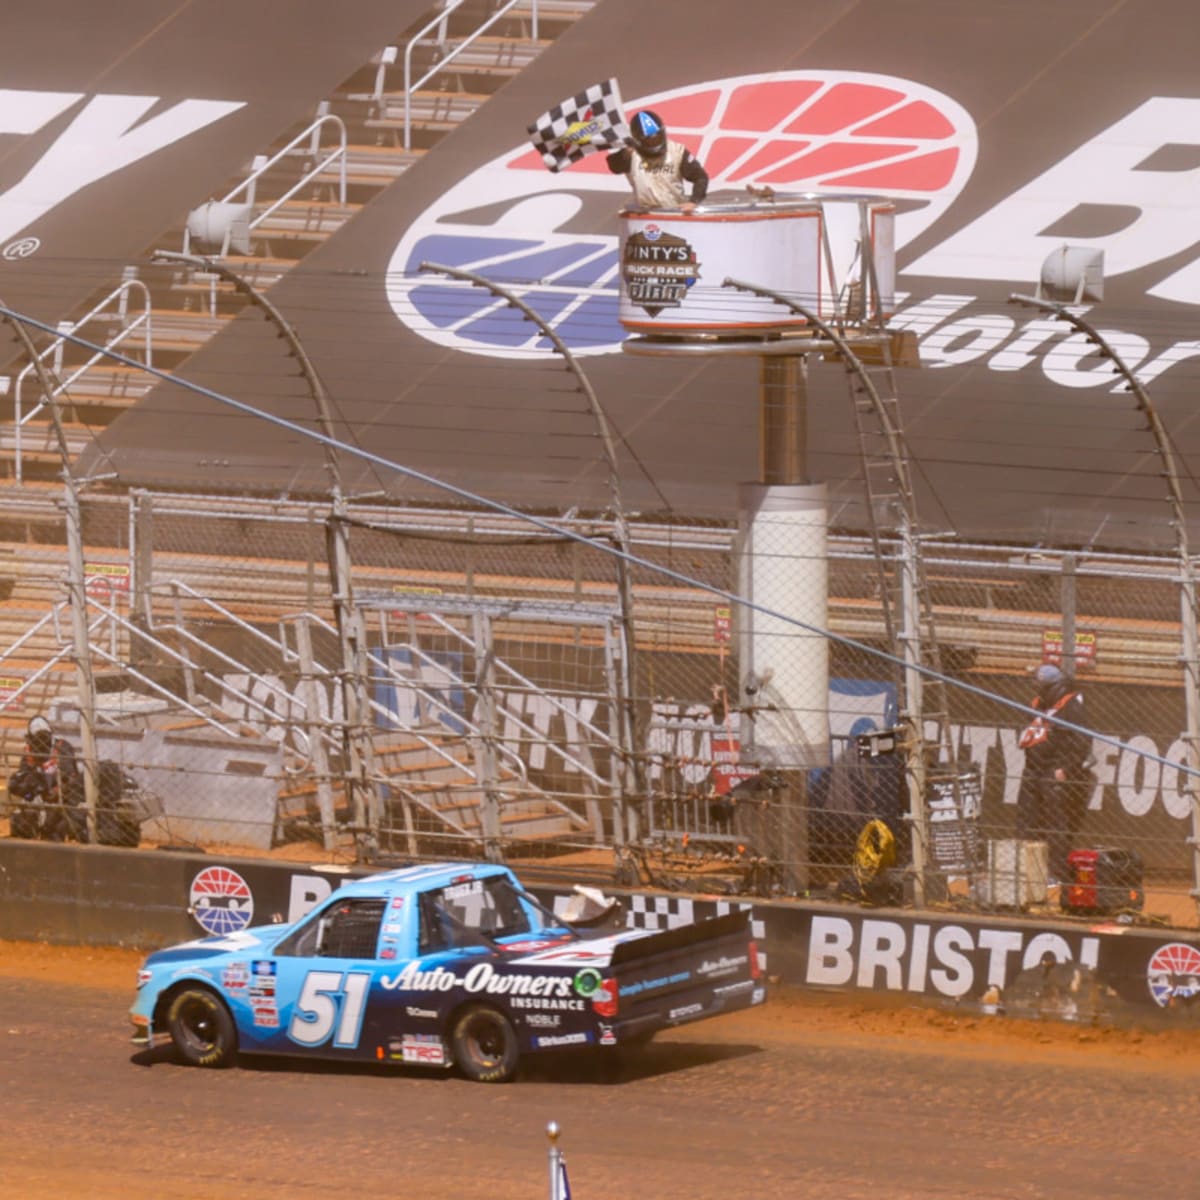 Watch Weather Guard Truck Race on Dirt Stream NASCAR Truck Series live - How to Watch and Stream Major League and College Sports